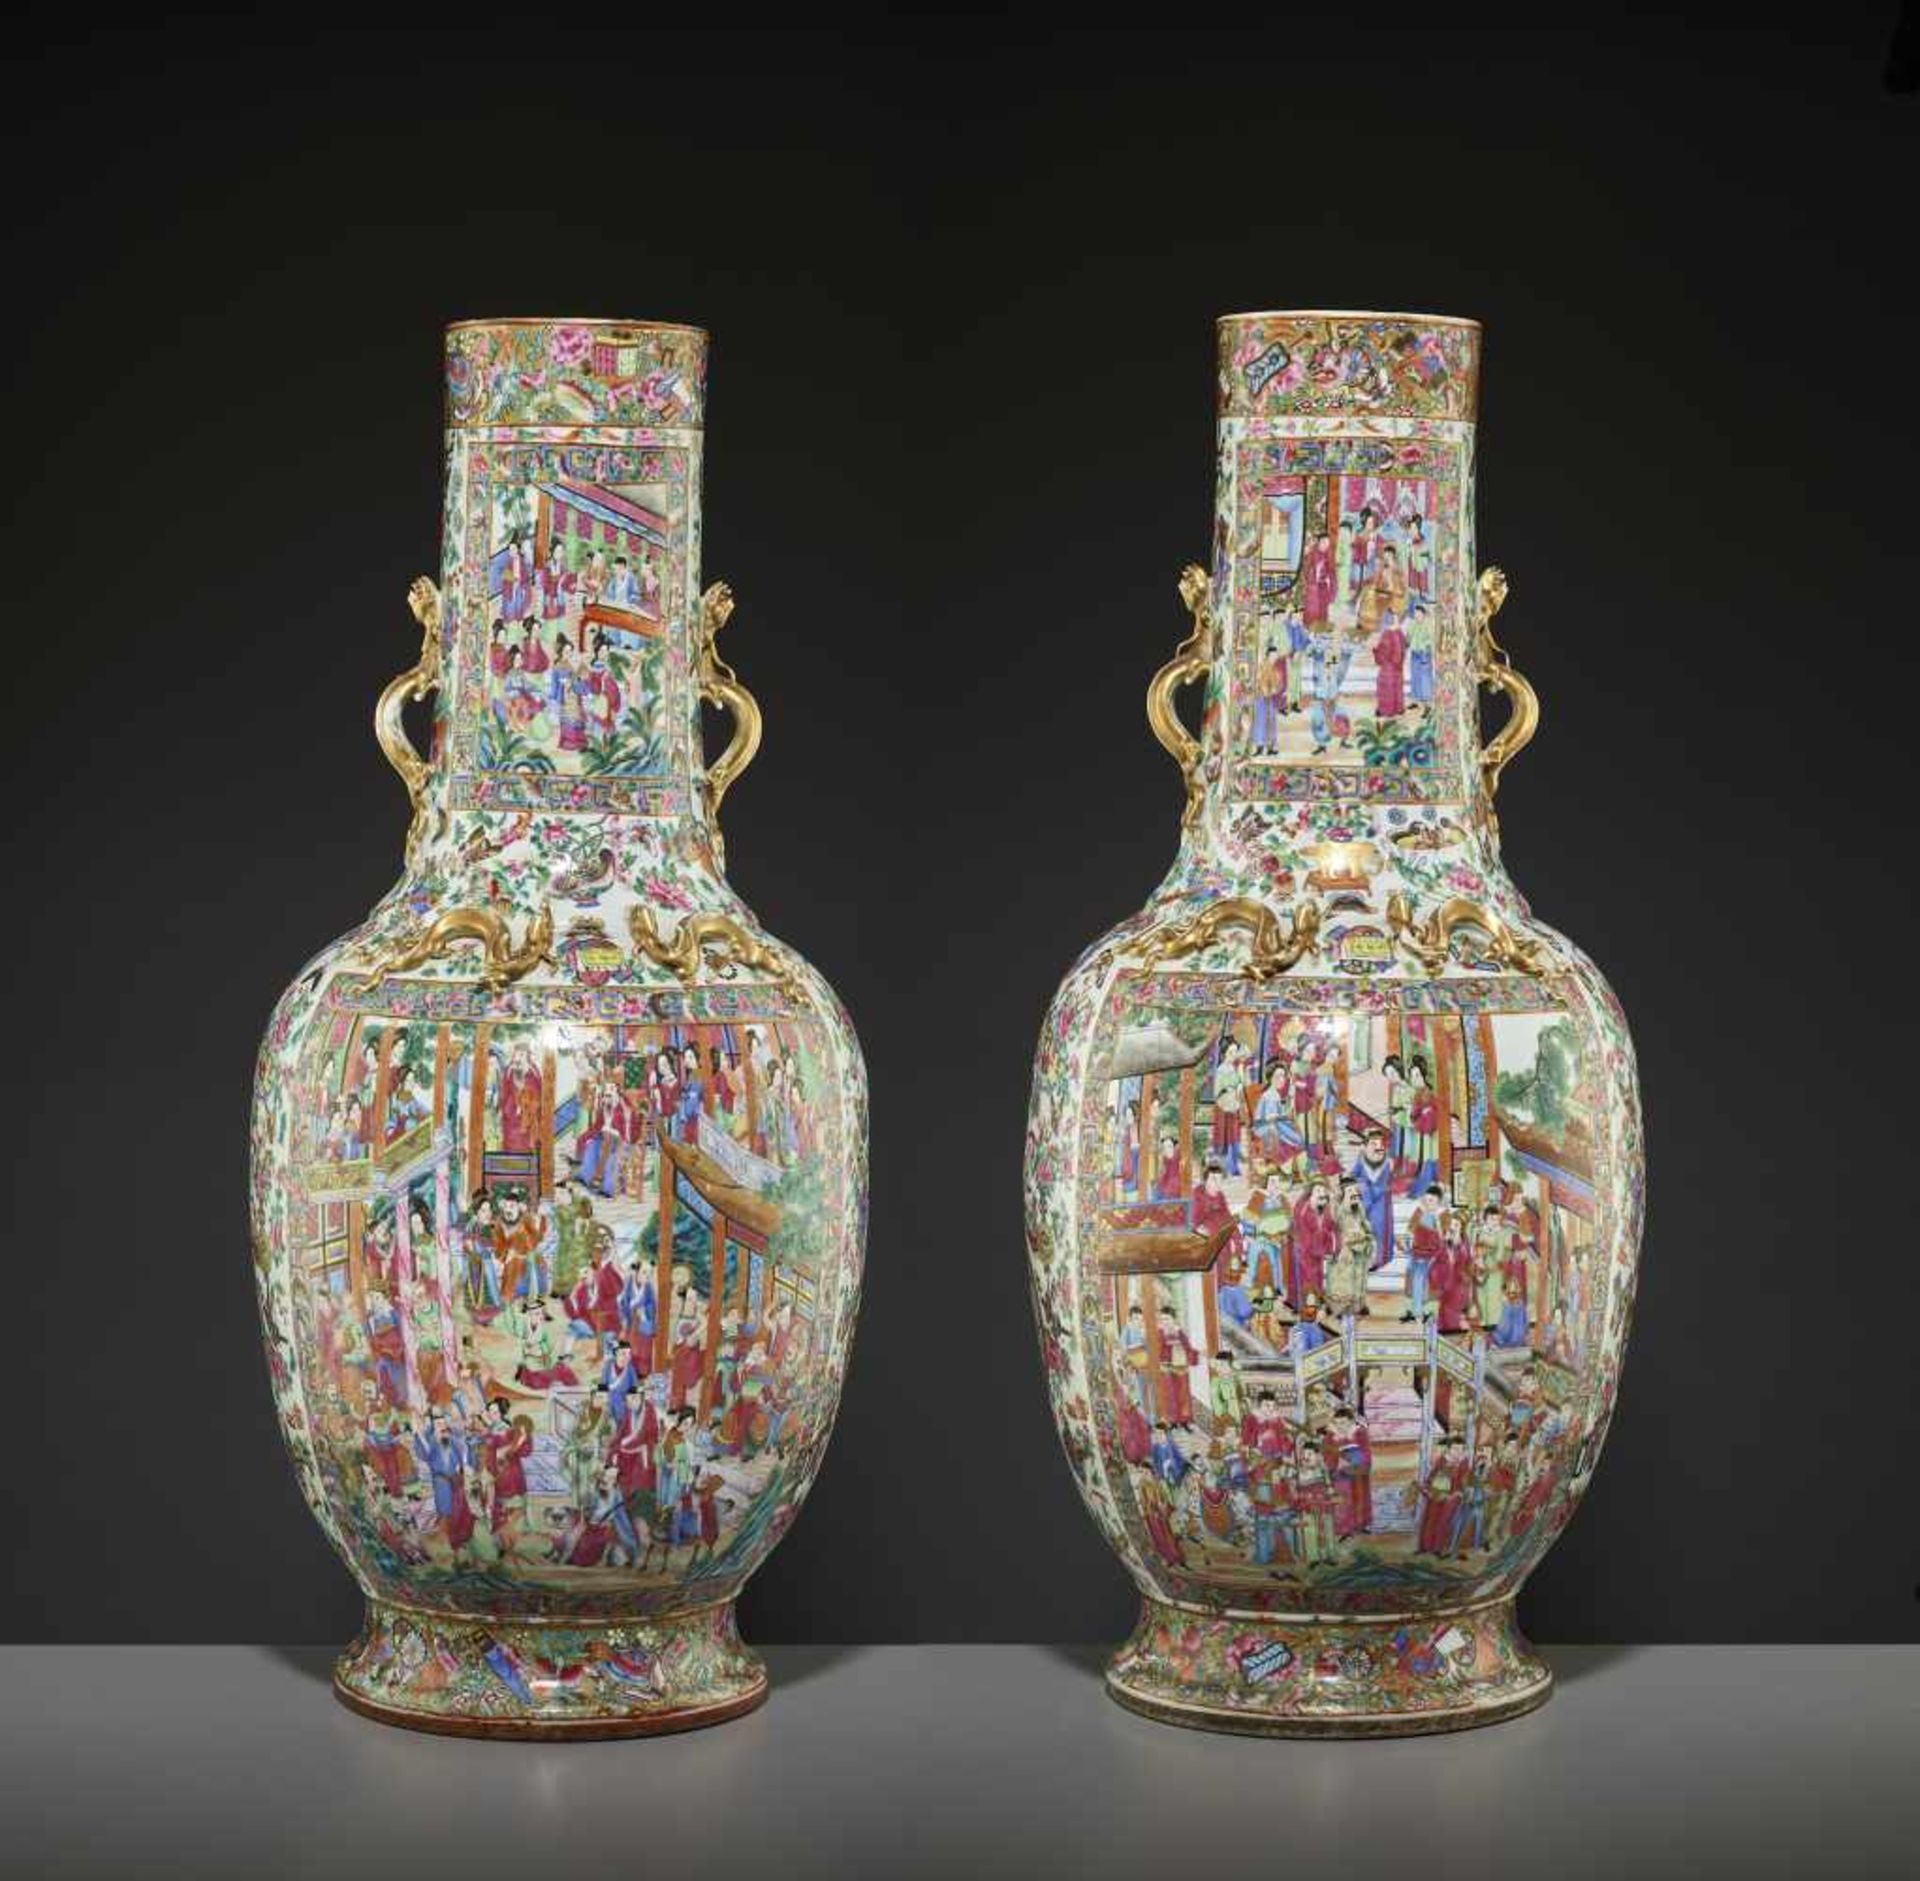 TWO LARGE WATER MARGIN VASES, 1850sChina, mid-19th century. Painted in bright enamels from the